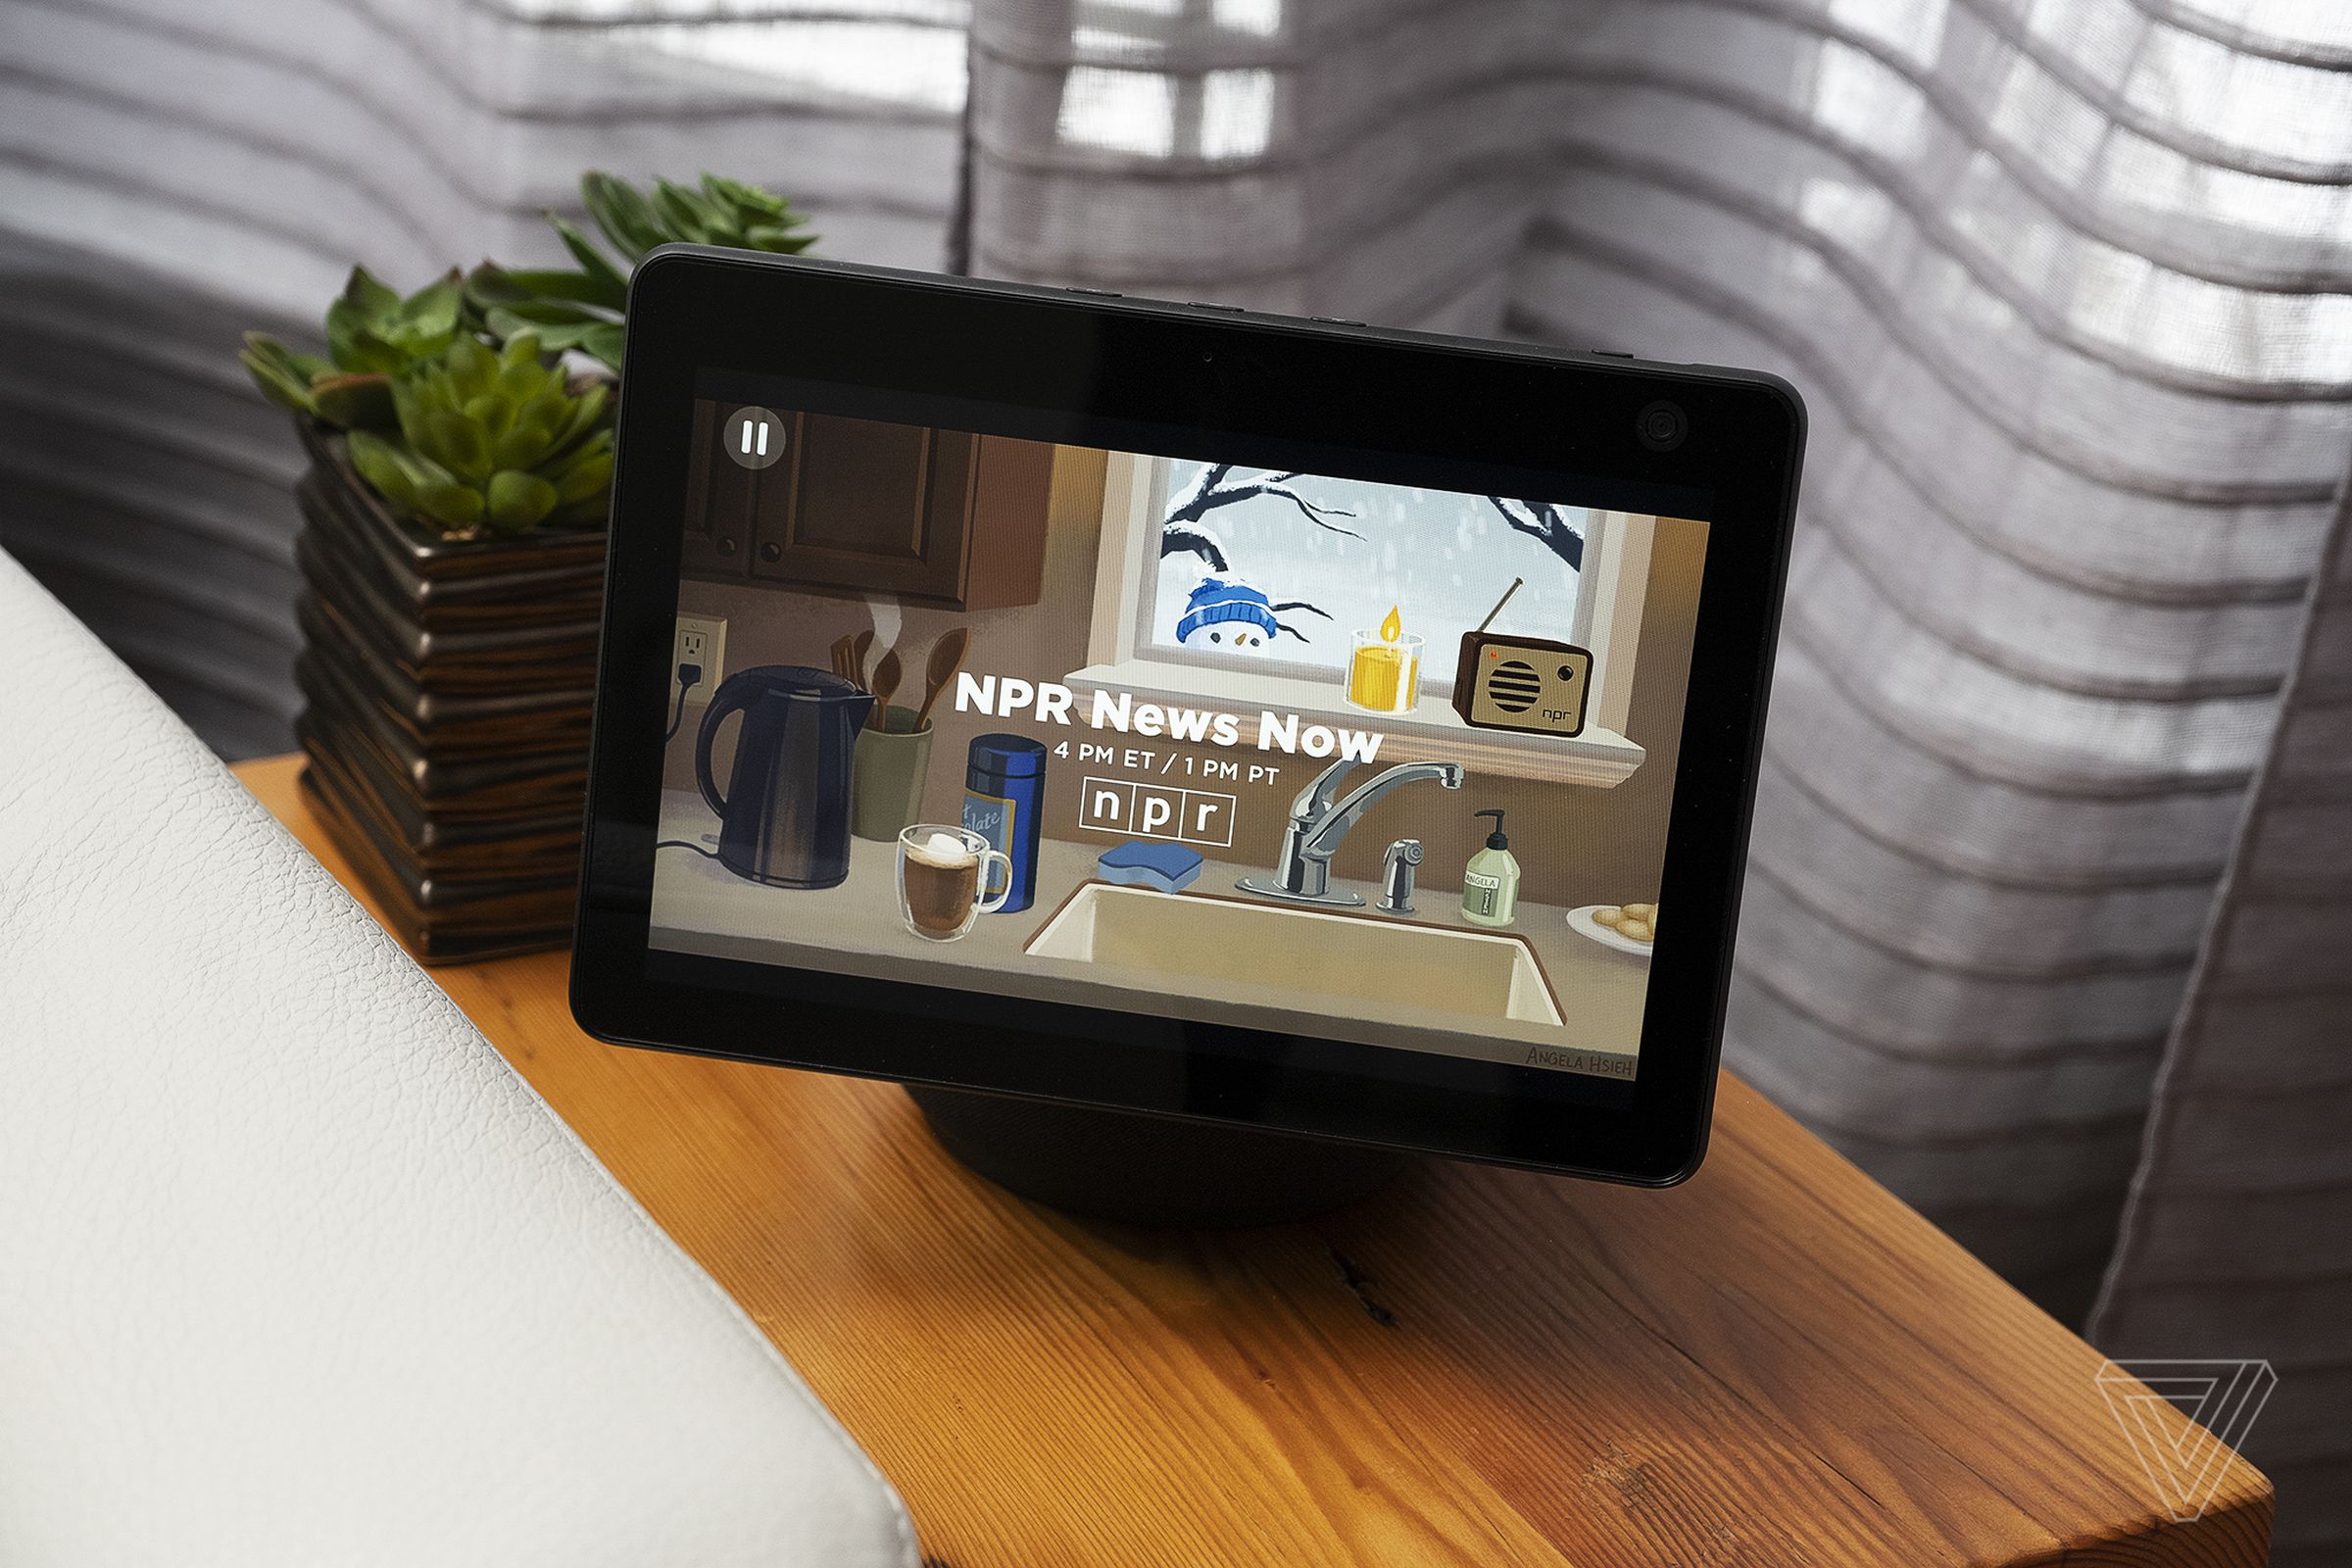 News reports are accompanied by a visual animation on the Echo Show 10.